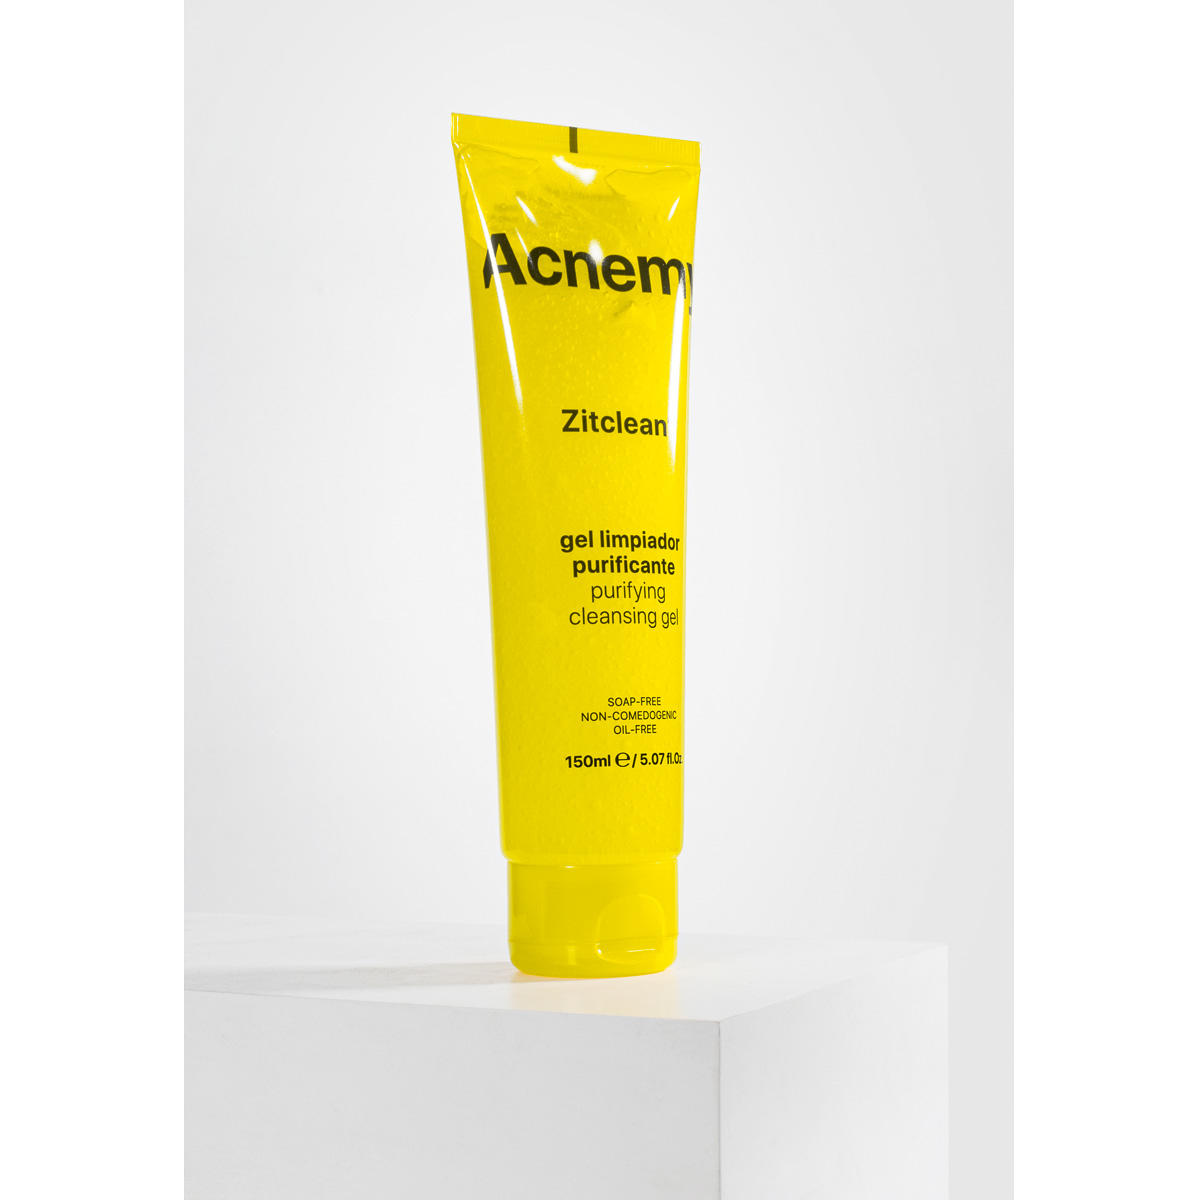 Acnemy ZITCLEAN Purifying Cleansing Gel 150 ml - 5